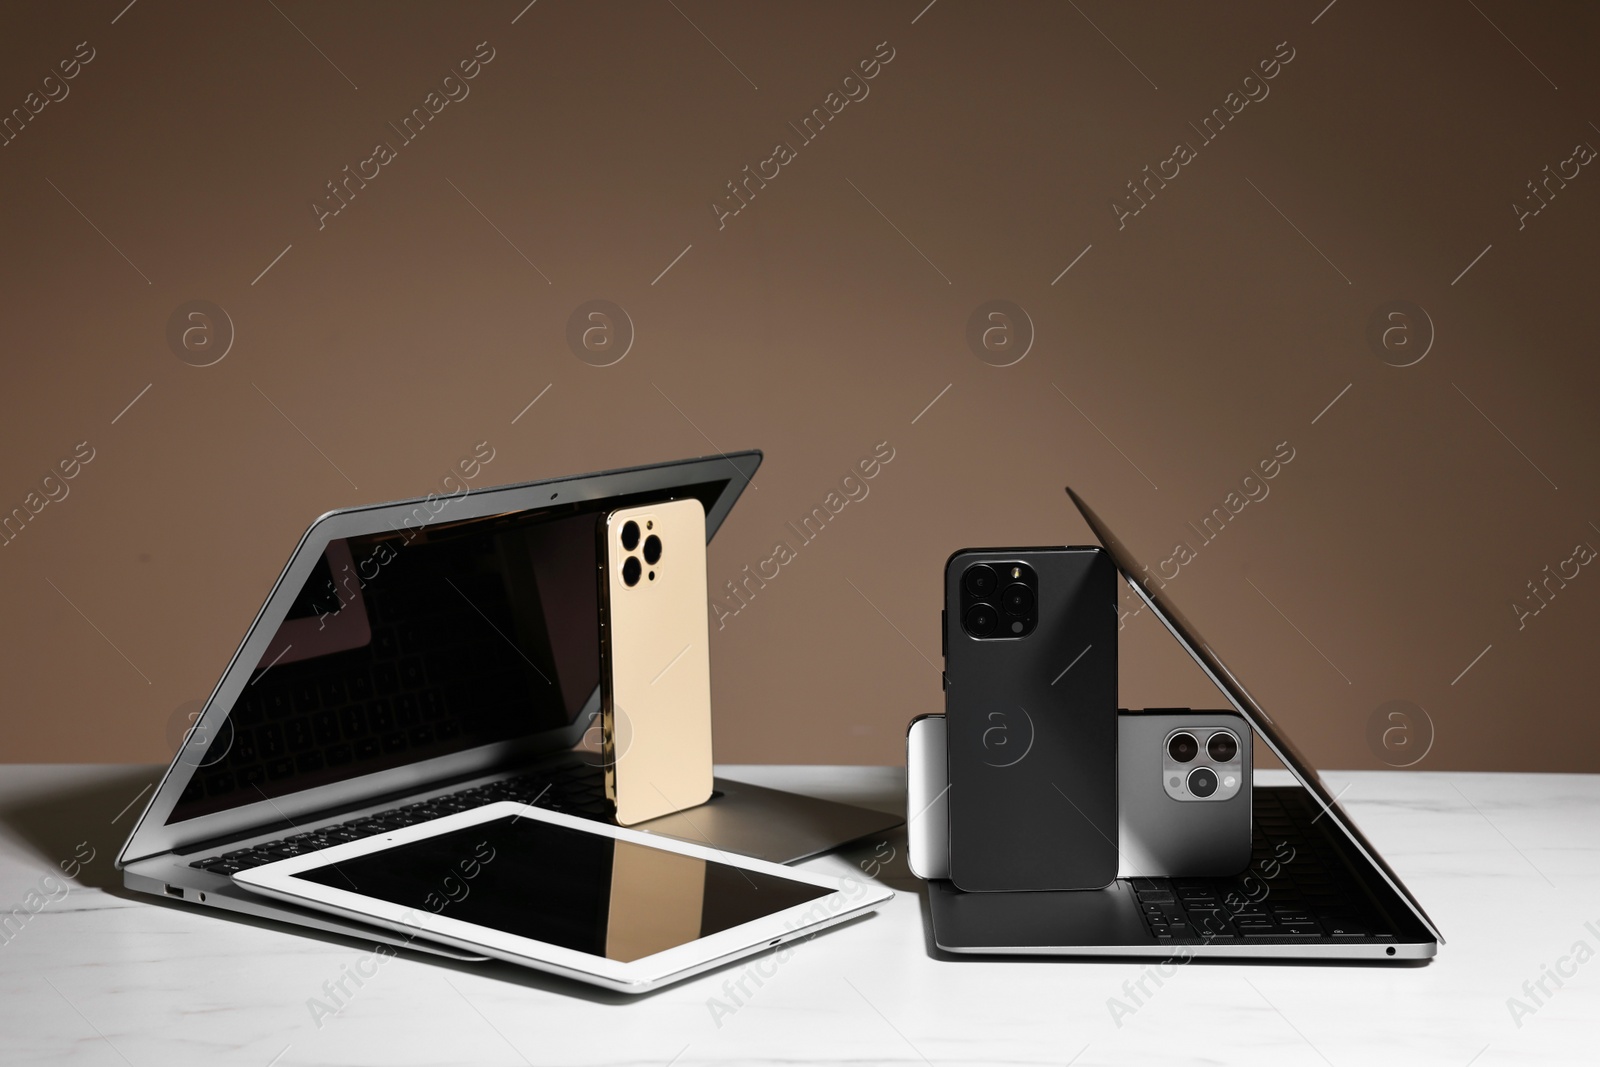 Photo of Many different modern gadgets on white table against brown background